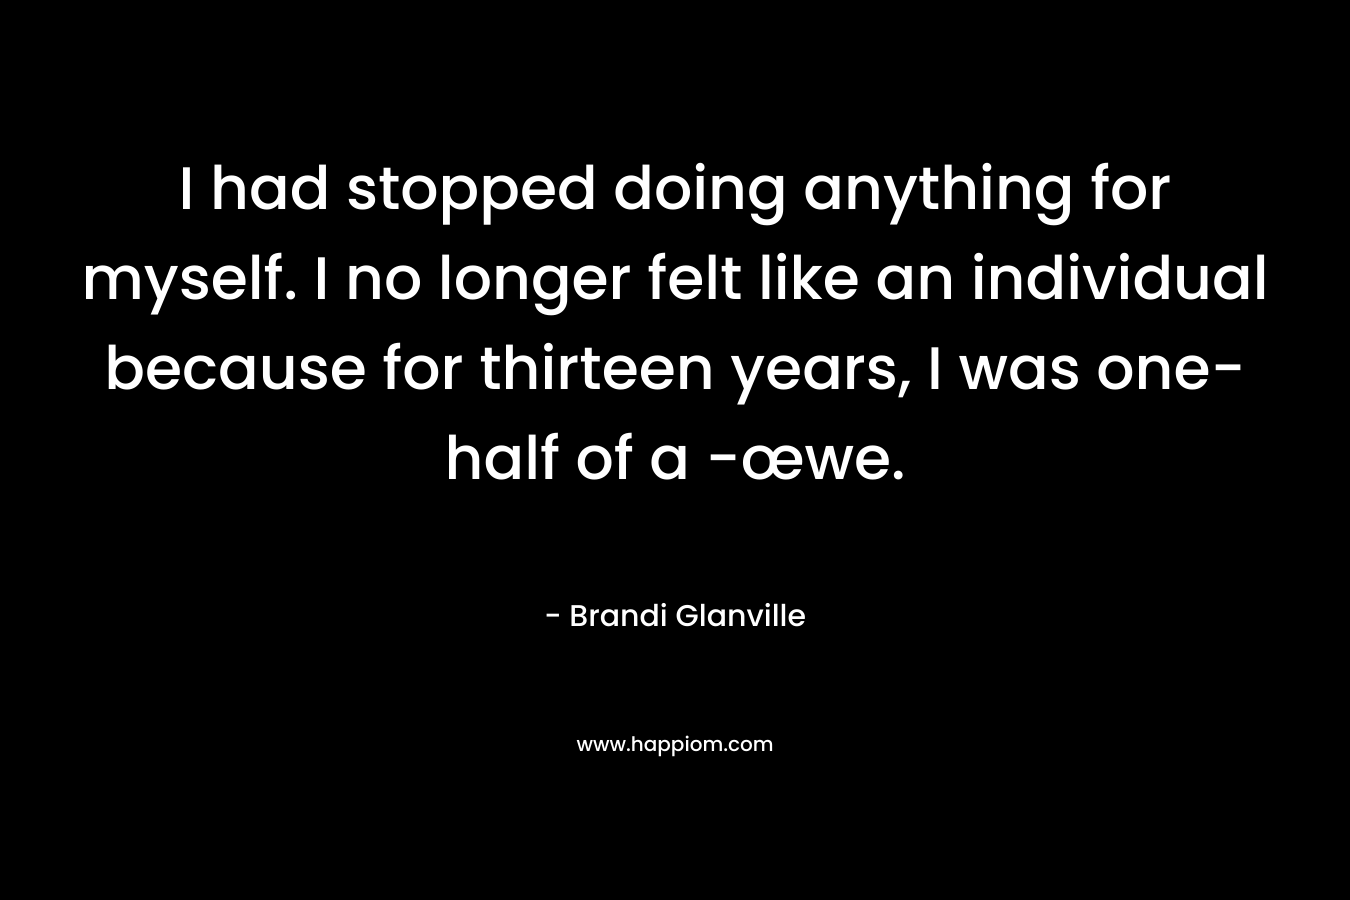 I had stopped doing anything for myself. I no longer felt like an individual because for thirteen years, I was one-half of a -œwe. – Brandi Glanville